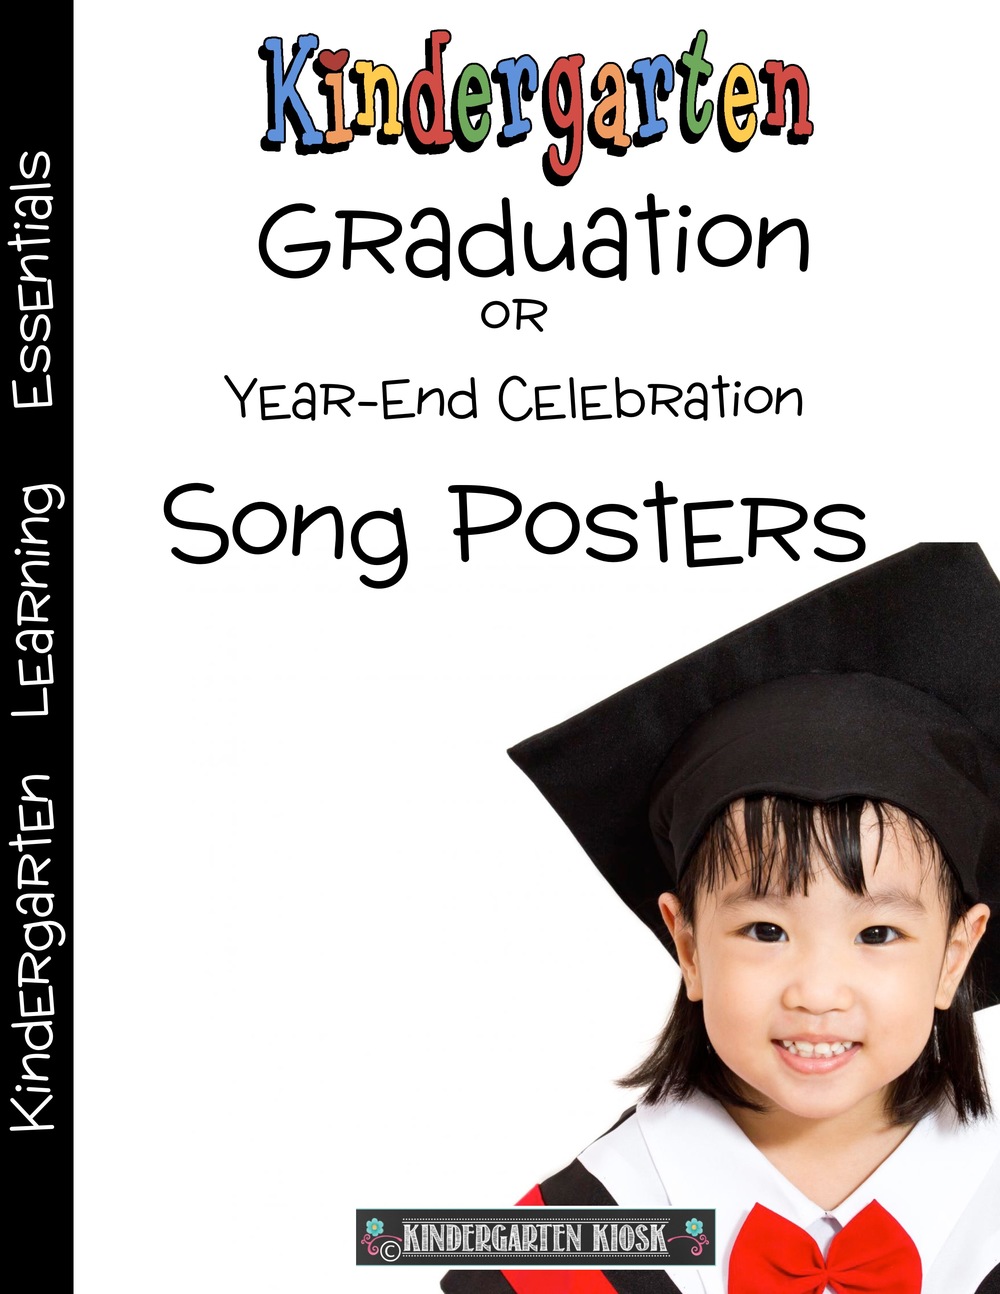 Graduation and End of the Year Song Lyrics Bundle by The Brighter